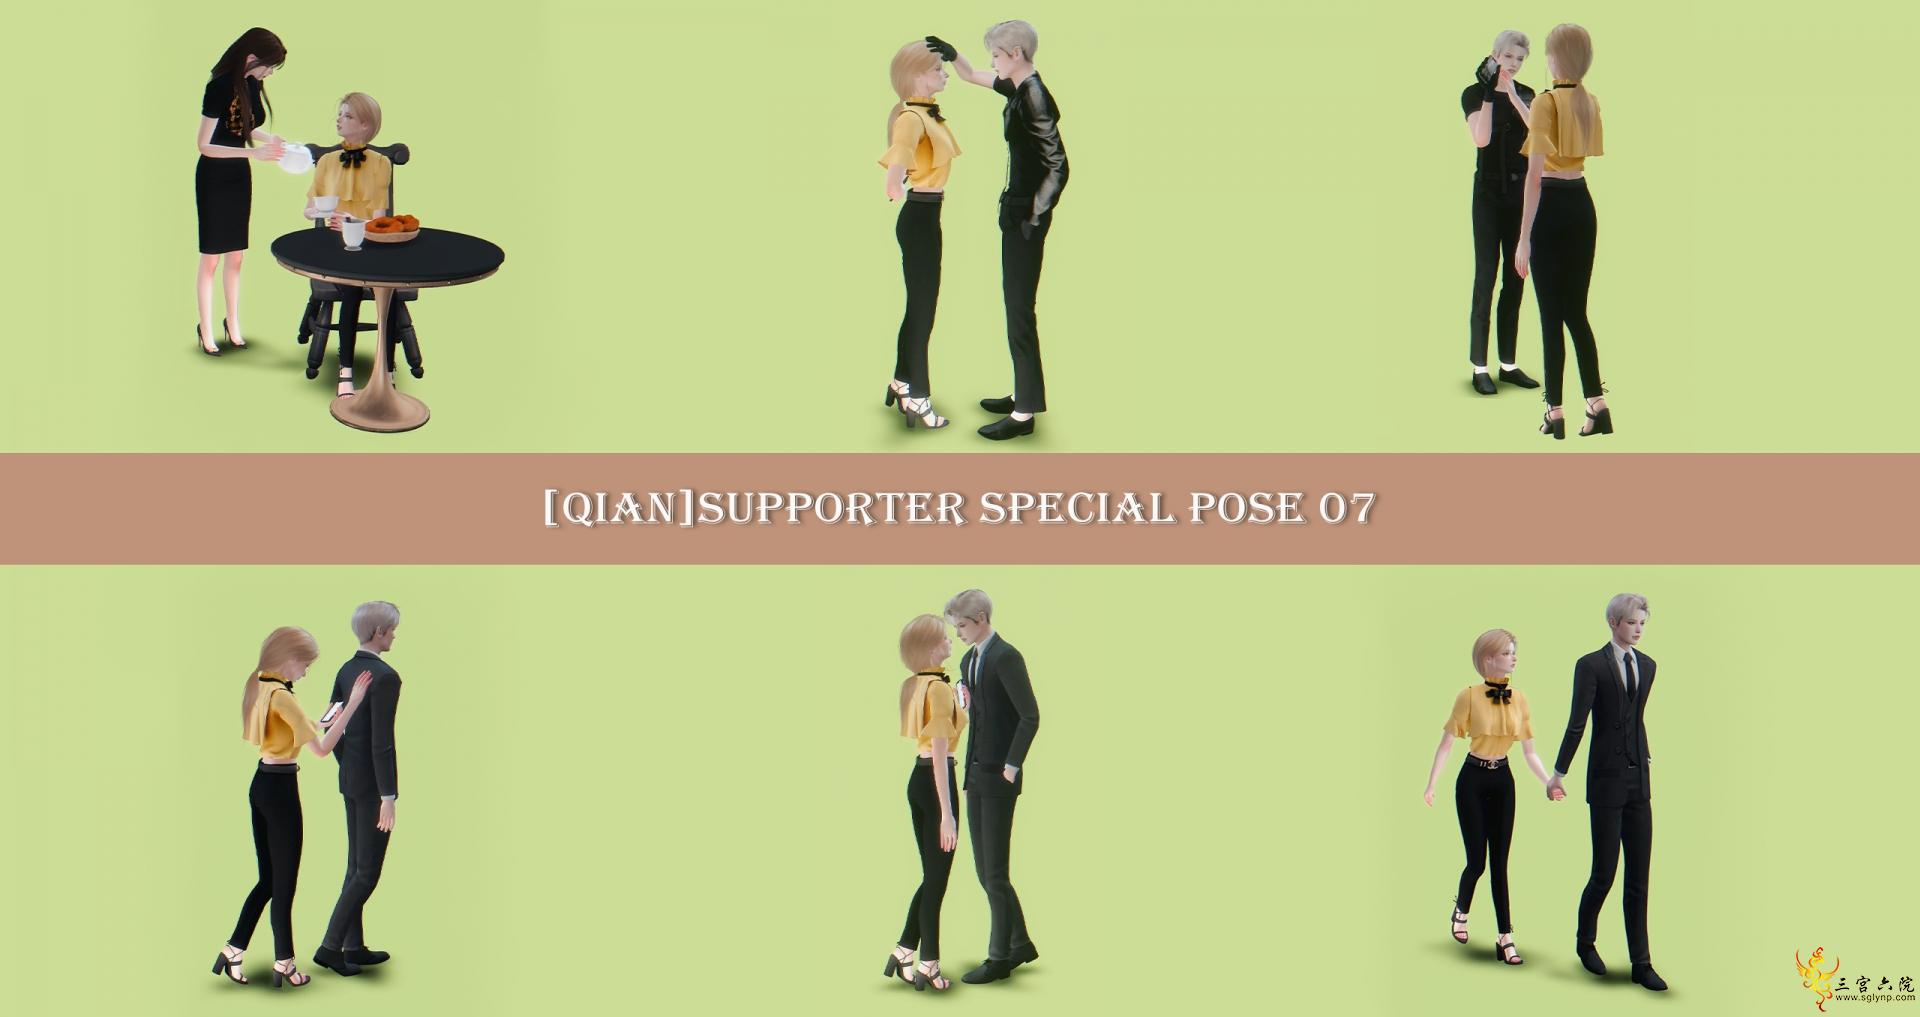 [Qian]Supporter Special pose 07-2.jpg